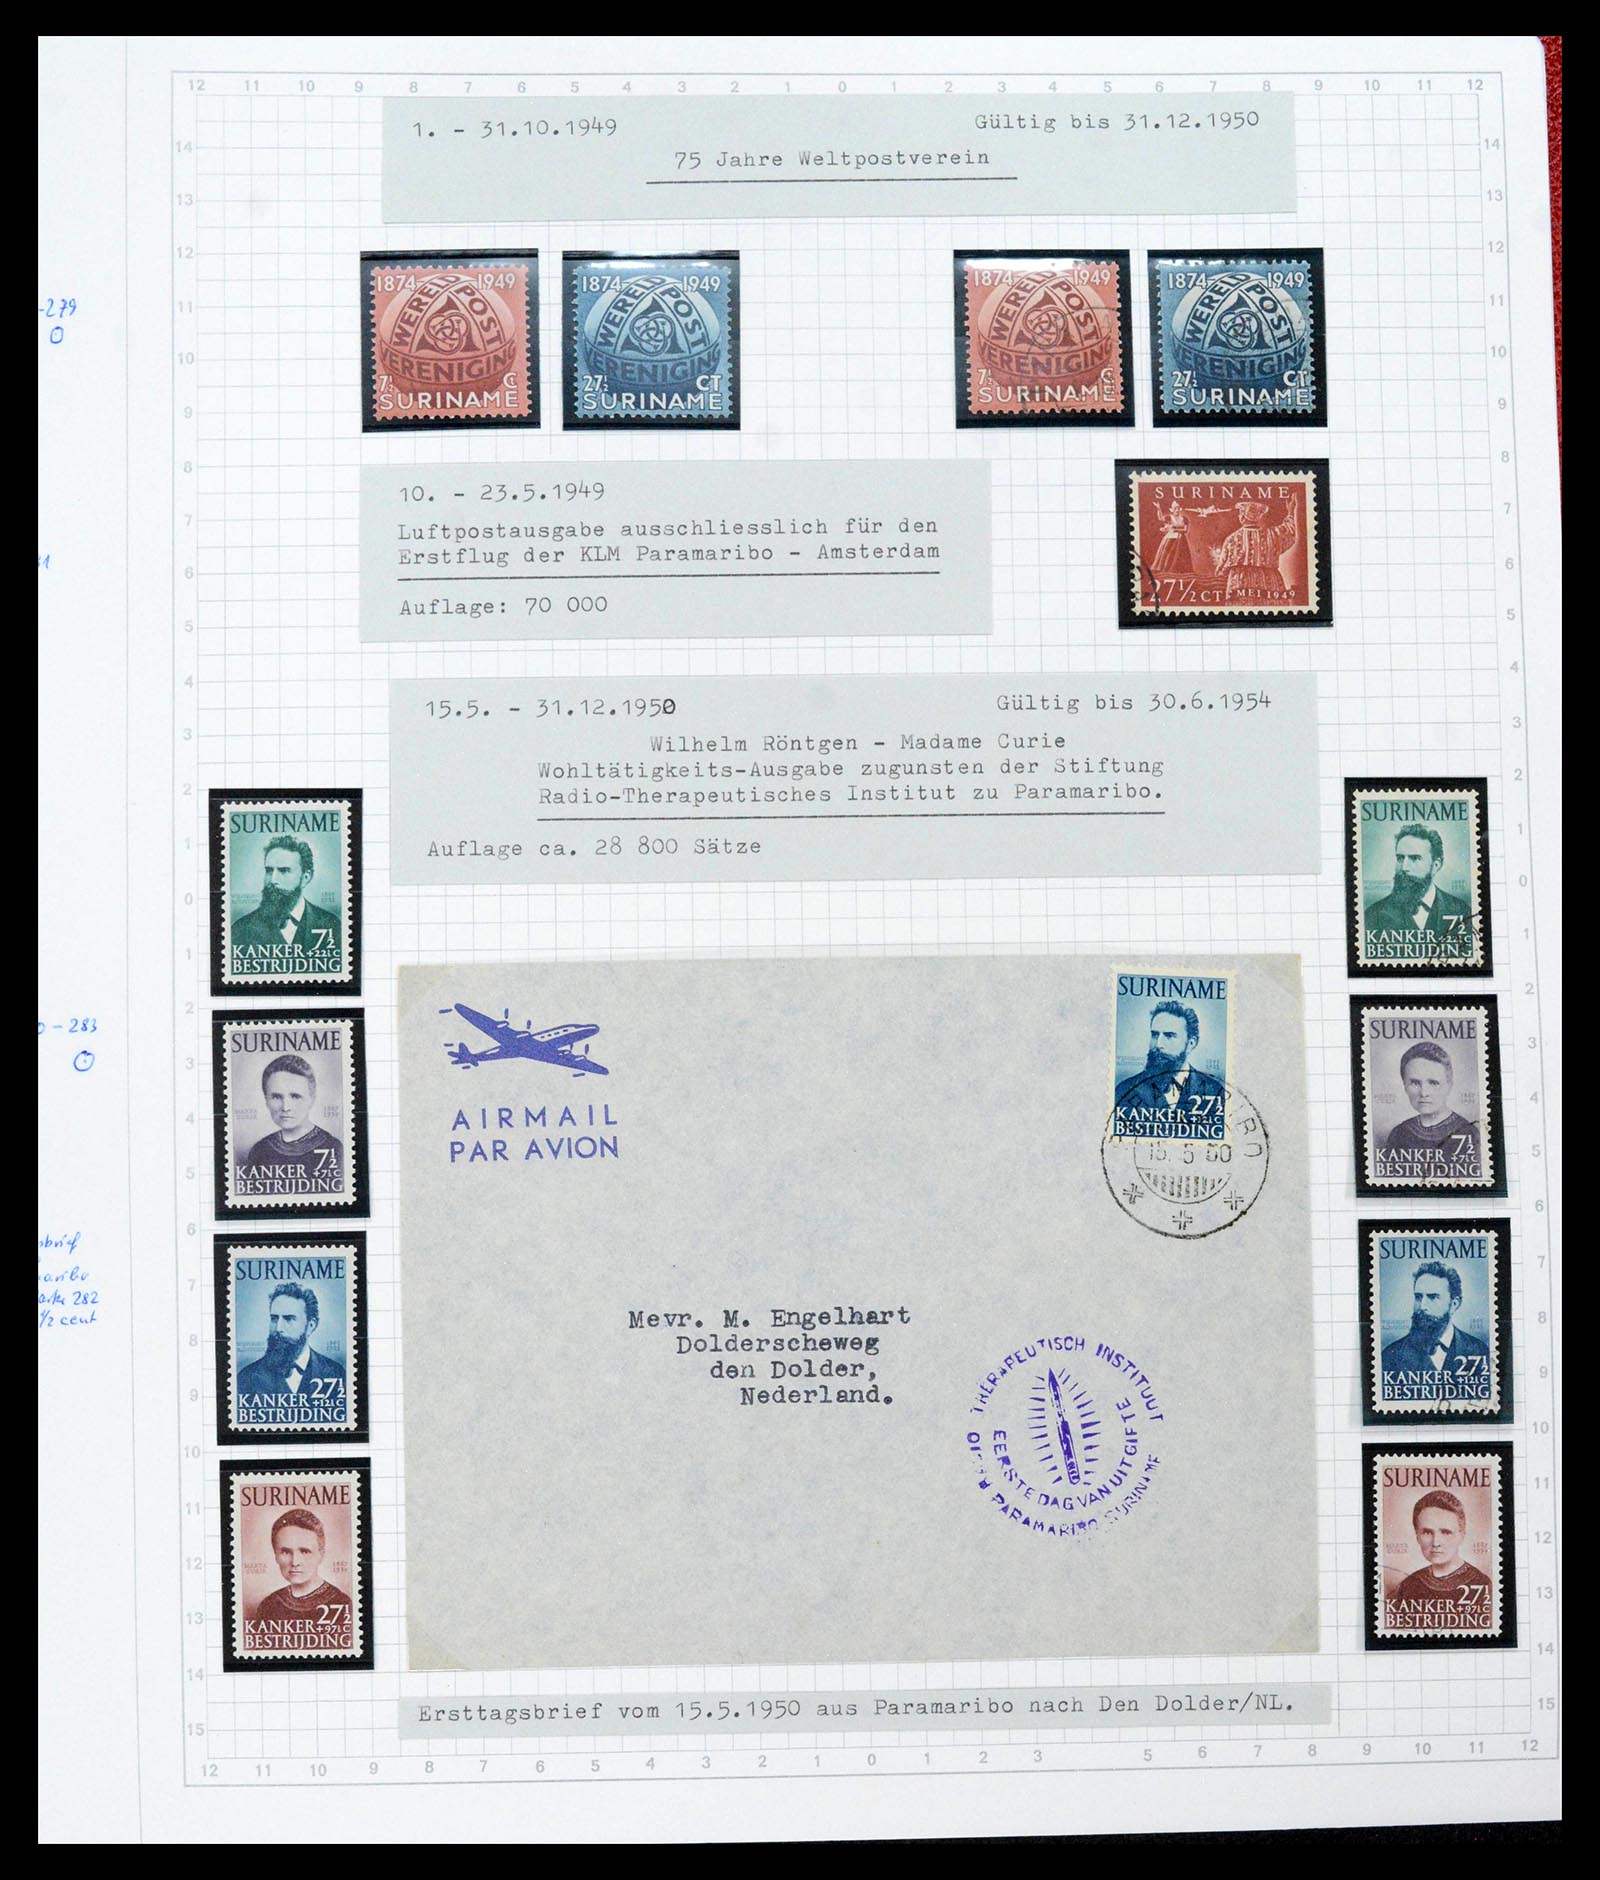 39373 0031 - Stamp collection 39373 Suriname 1873-1975.